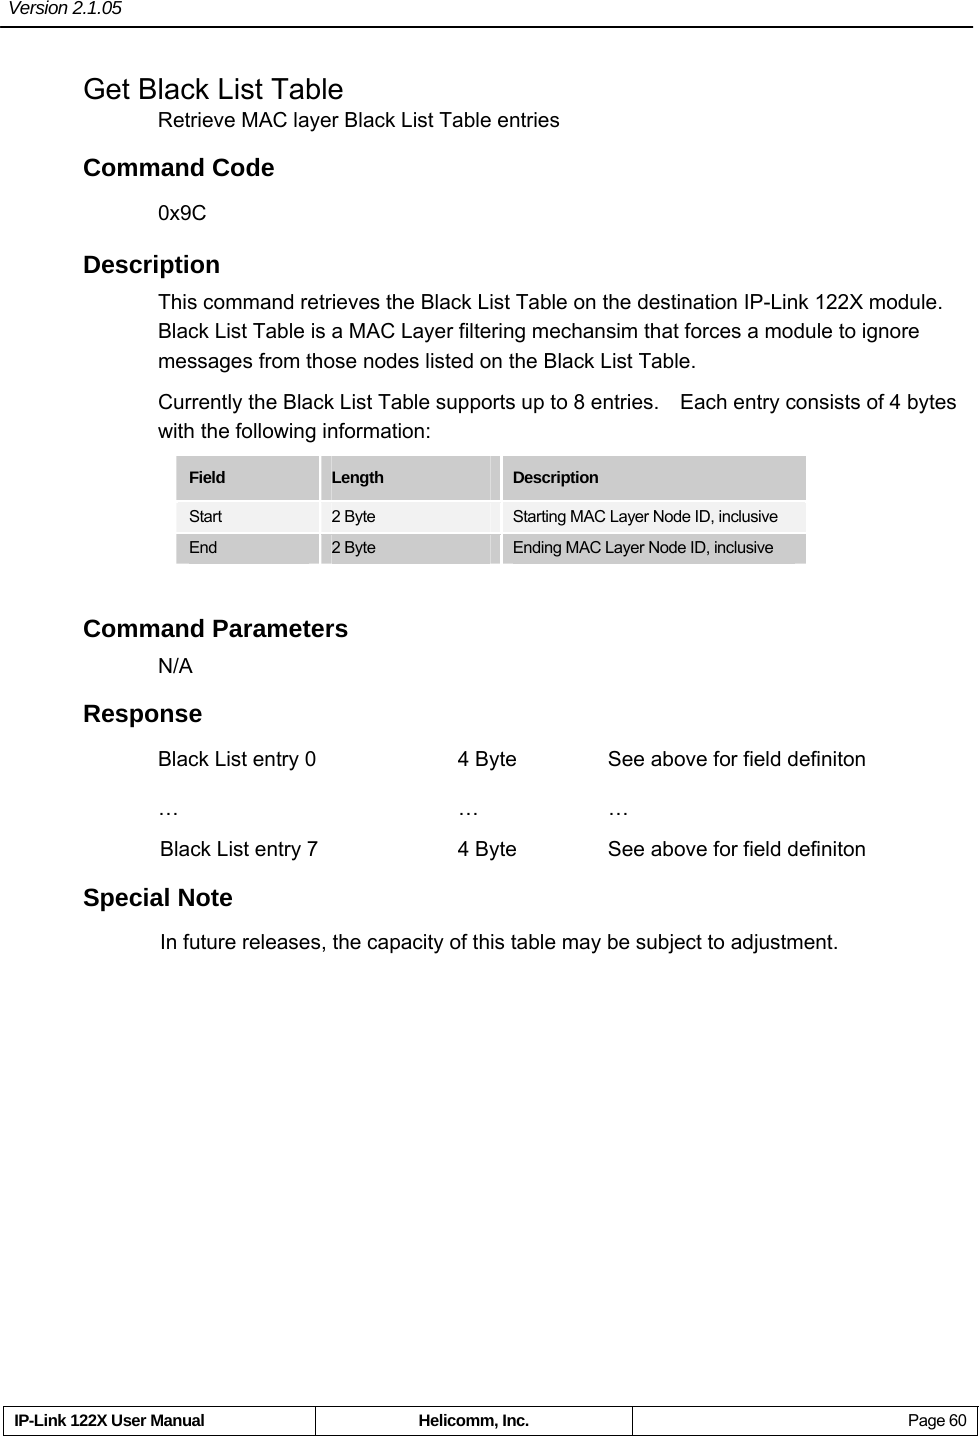 Version 2.1.05     IP-Link 122X User Manual  Helicomm, Inc.  Page 60   Get Black List Table Retrieve MAC layer Black List Table entries Command Code 0x9C Description This command retrieves the Black List Table on the destination IP-Link 122X module.   Black List Table is a MAC Layer filtering mechansim that forces a module to ignore messages from those nodes listed on the Black List Table.     Currently the Black List Table supports up to 8 entries.    Each entry consists of 4 bytes with the following information: Field  Length  Description Start  2 Byte  Starting MAC Layer Node ID, inclusive End  2 Byte      Ending MAC Layer Node ID, inclusive  Command Parameters N/A  Response  Black List entry 0    4 Byte    See above for field definiton …    …  … Black List entry 7    4 Byte     See above for field definiton Special Note In future releases, the capacity of this table may be subject to adjustment. 